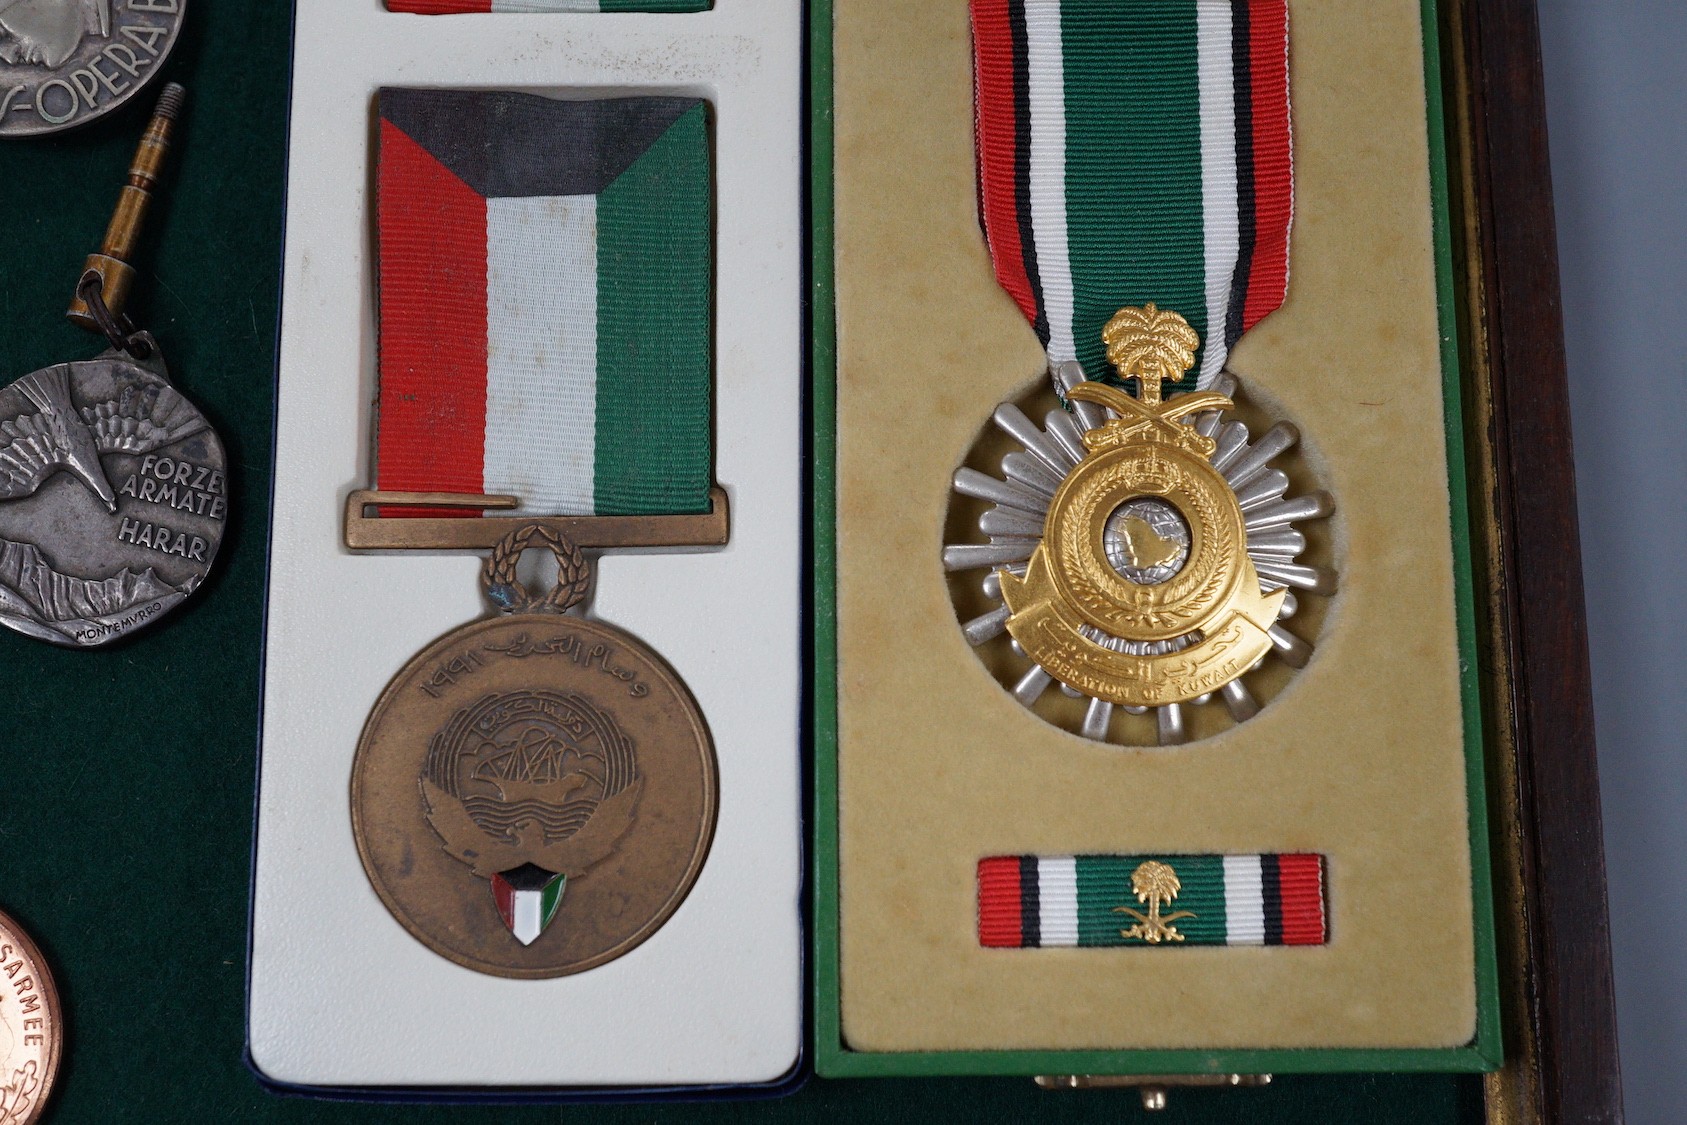 Foreign medals - Pakistan GSM with Kashmir 1948 clasp, two Liberation of Kuwait medals, Saudi Arabia and Kuwait issues, East German reserve medal, Italian Ethiopia Campaign 1937 medal, ONB badge and Combattimento medal,